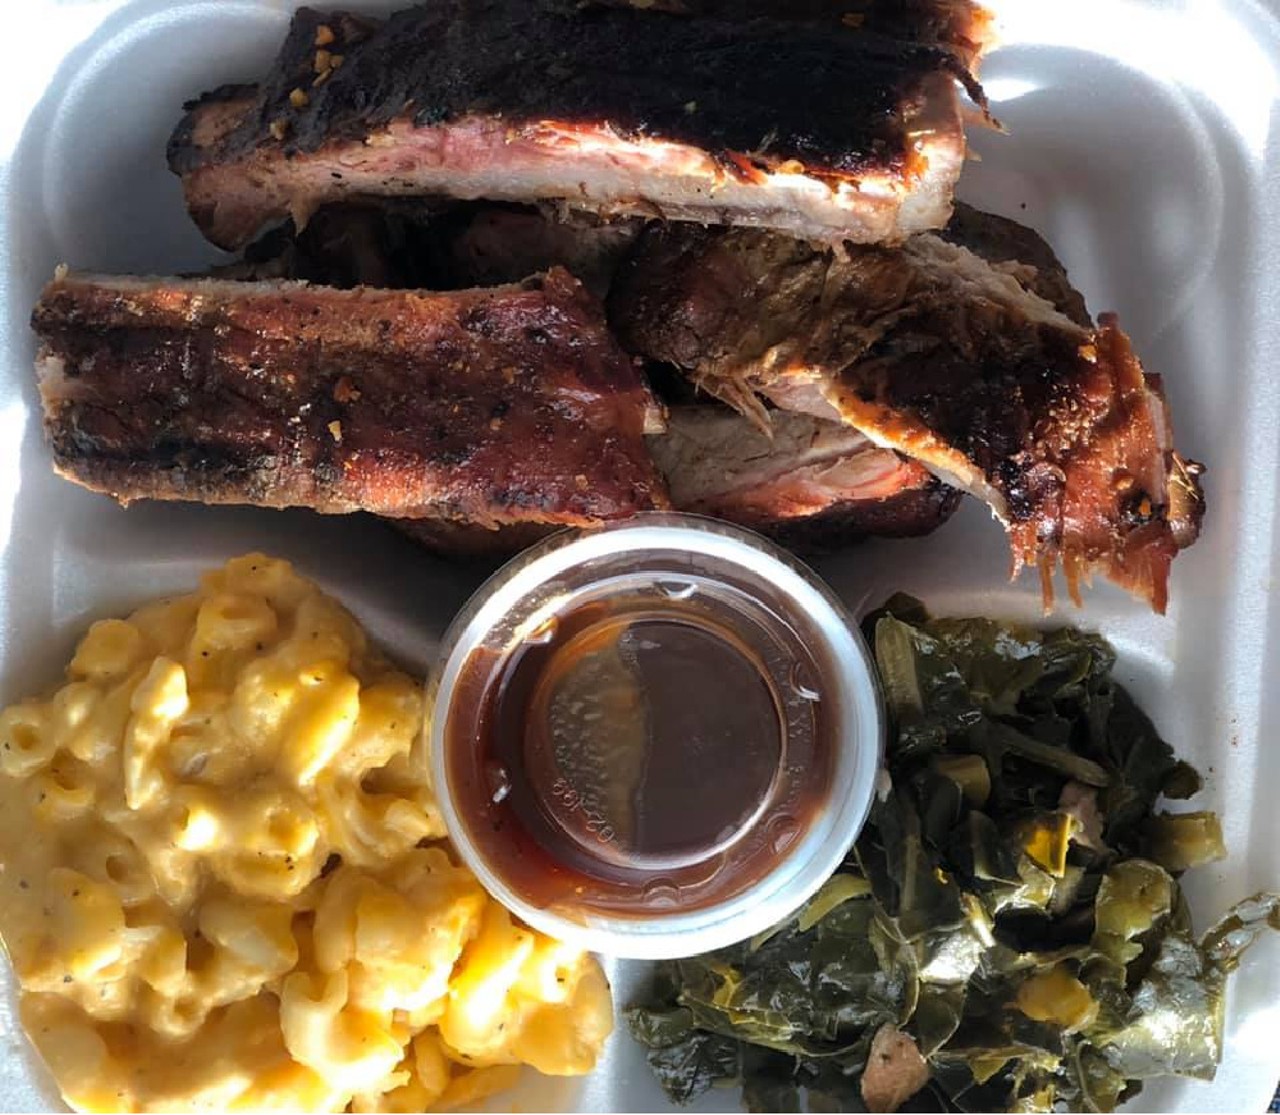 Nessas Food Co BBQ Restaurant  
14 West McKey St, Ocoee, 321-370-8172
&#148;Nessas has some really righteous ribs! Fall off the bones doesn't cover it. Let's say I'm surprised my serving even held onto the bone well enough to get from the grill to my to-go container. The ribs have some crusty blackened season rub outer skin that is sheer delight to slooooow the hell down and enjoy the mastication's needed to extract all that Nessa BBQ goodness out of it.&#148; - Mark C.
Photo via Nessas Food Co BBQ Restaurant/Facebook